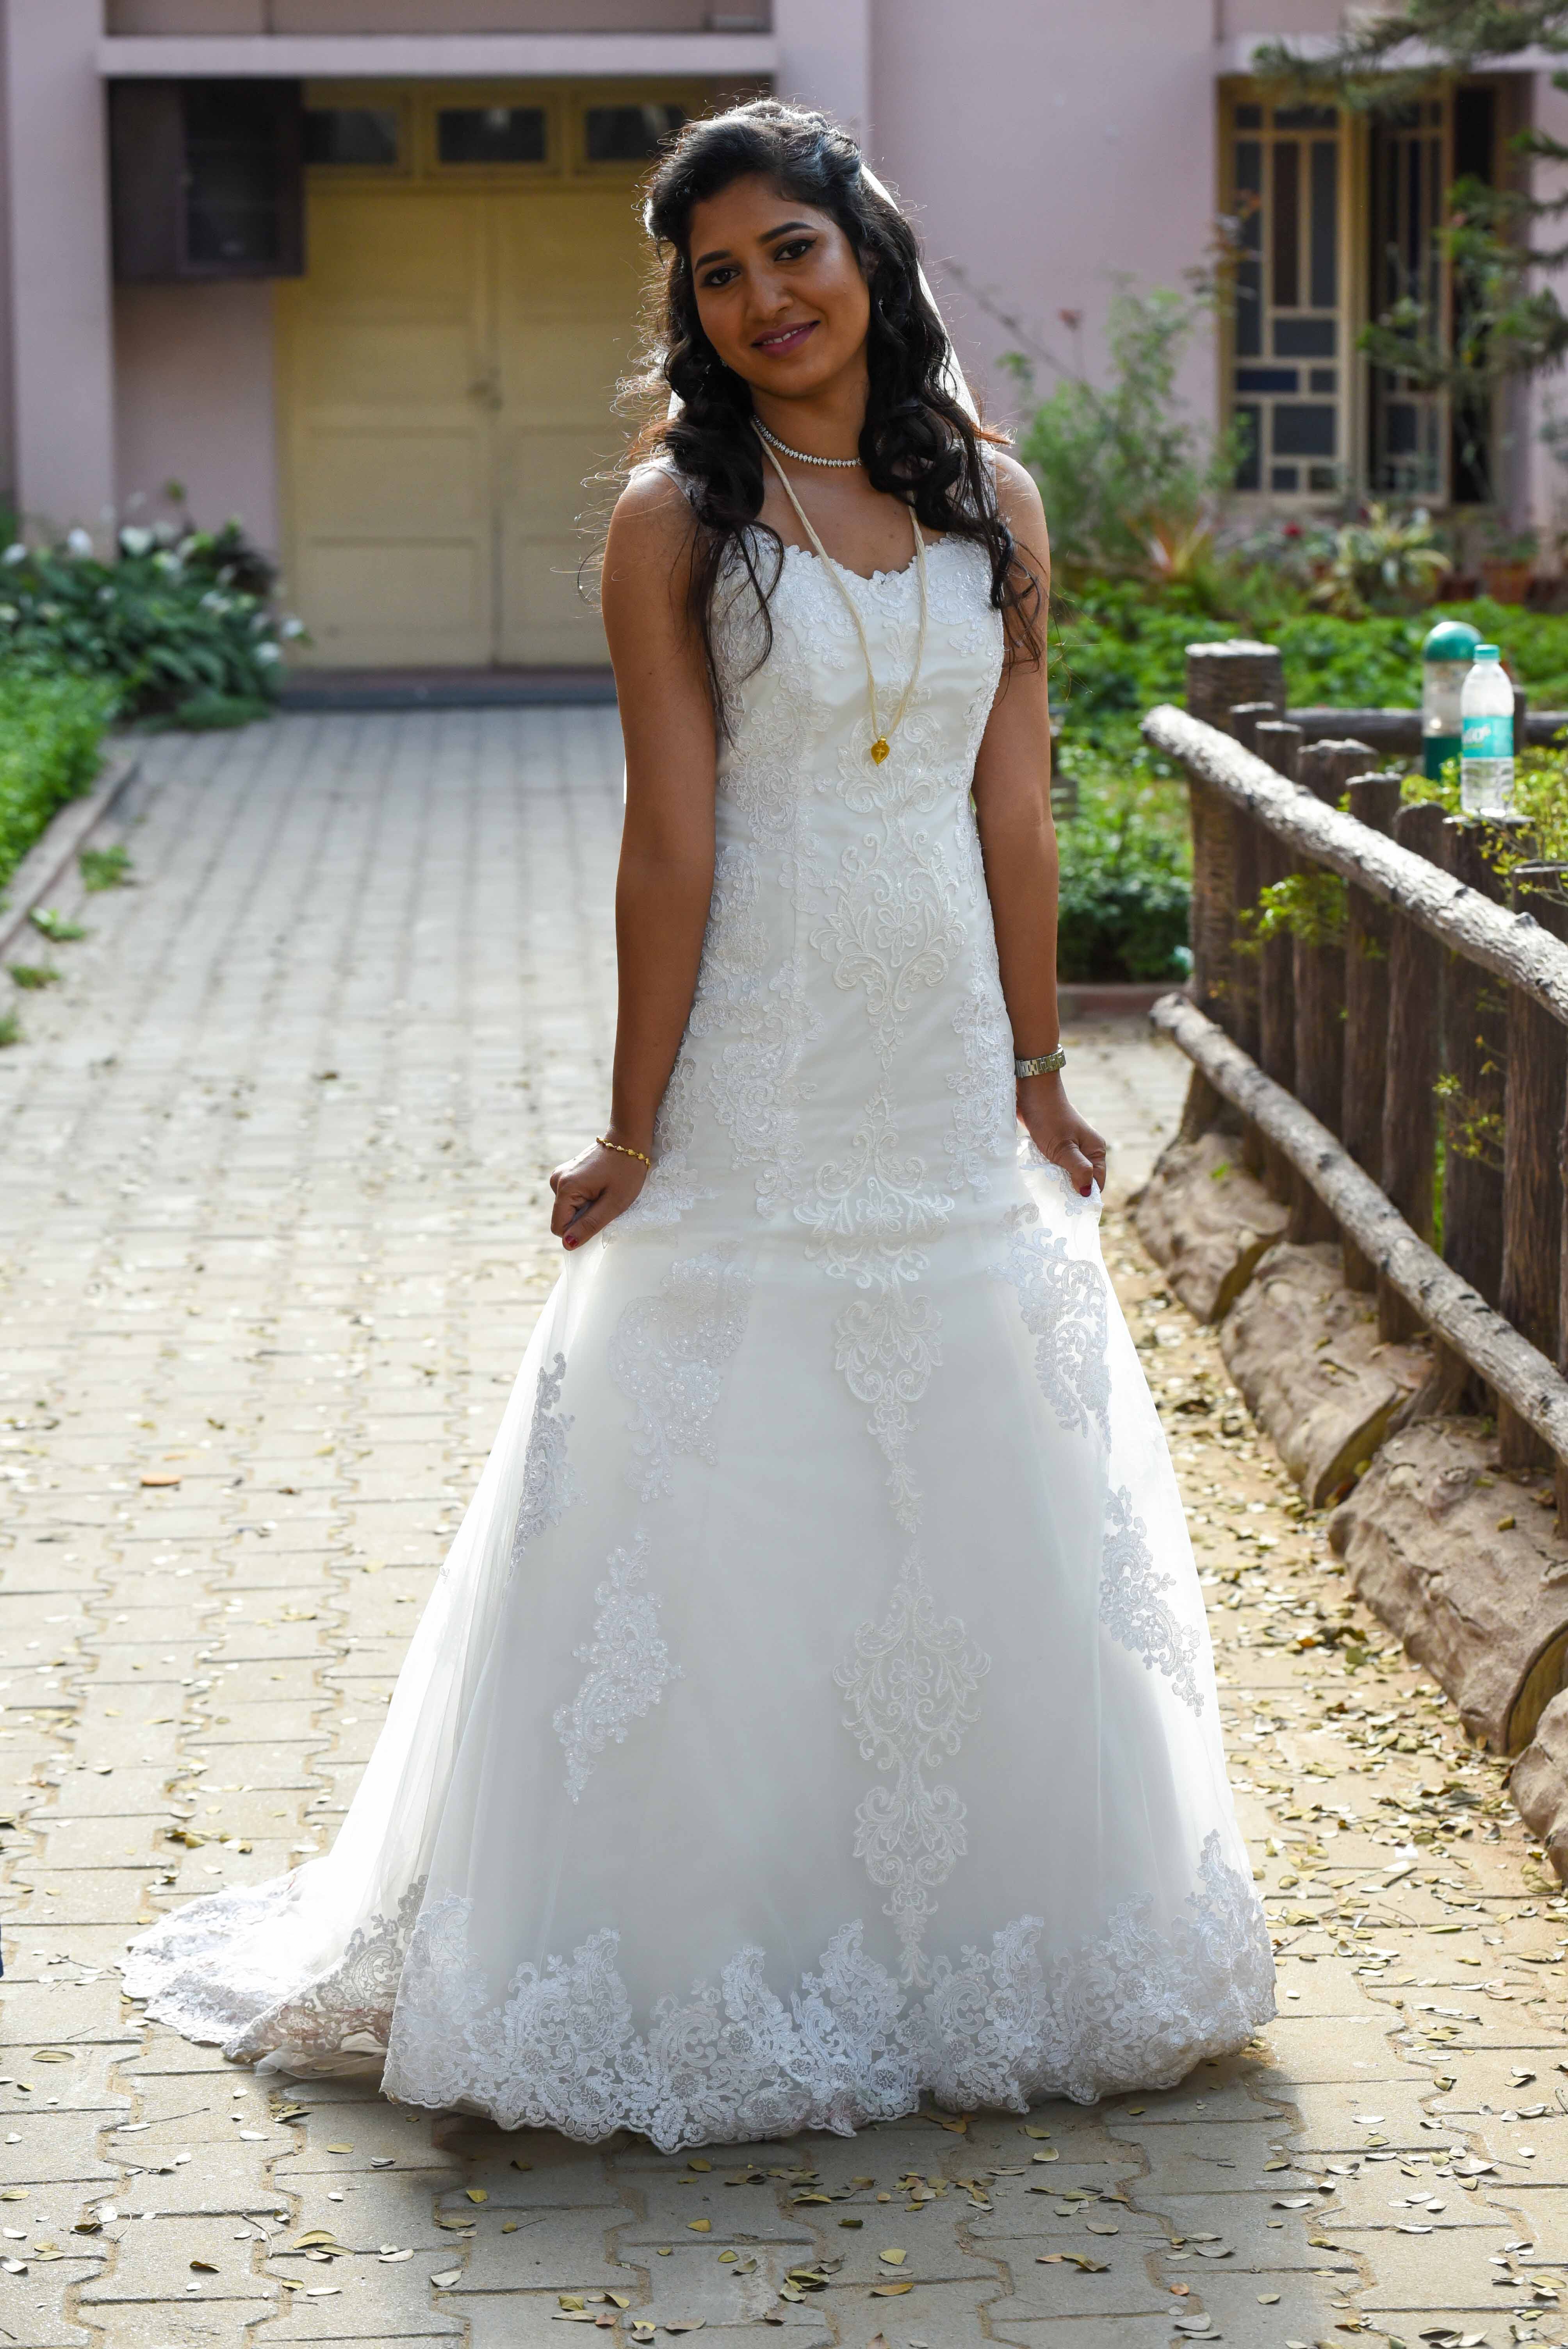 christian wedding gowns with price